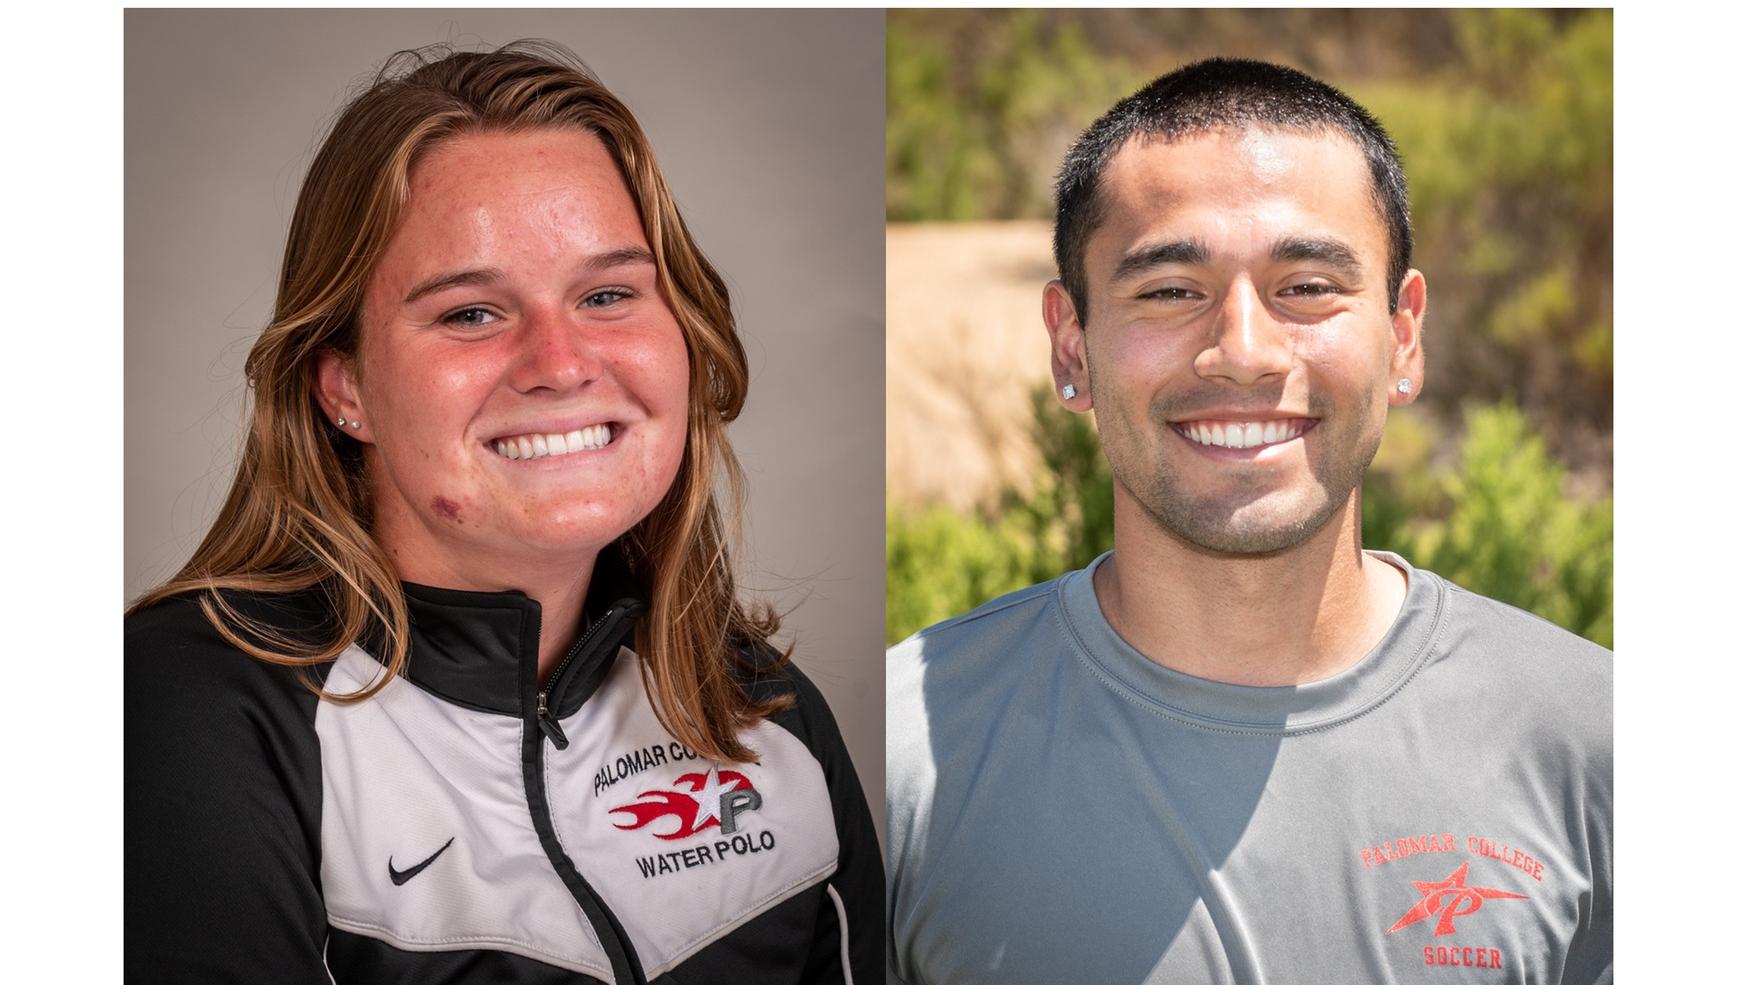 Dickson picks up PCAC Athlete-of-the-Month honor; Soltero named Honorable Mention